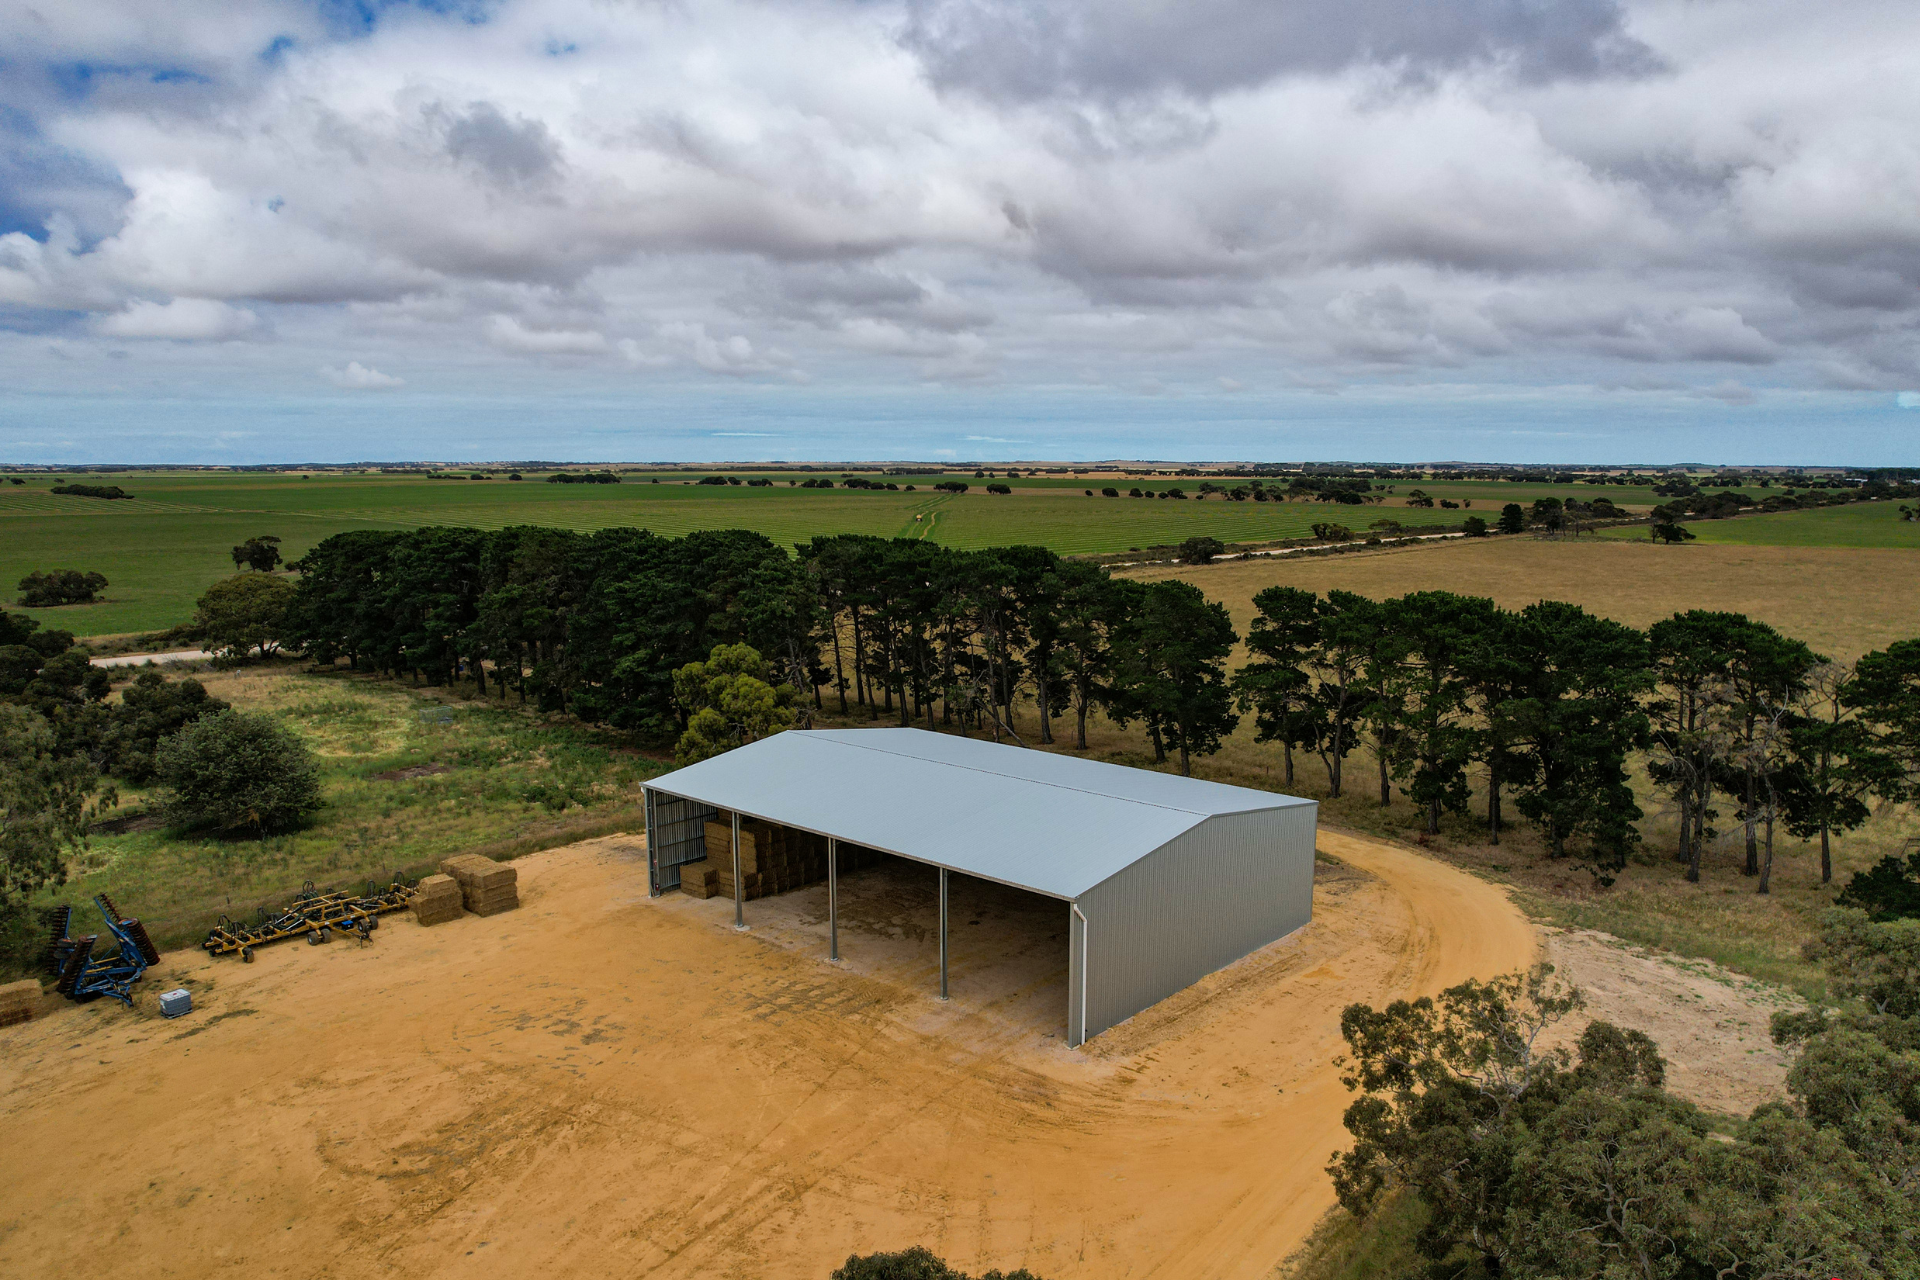 A 34m x 24m x 7.5m hay shed at Field